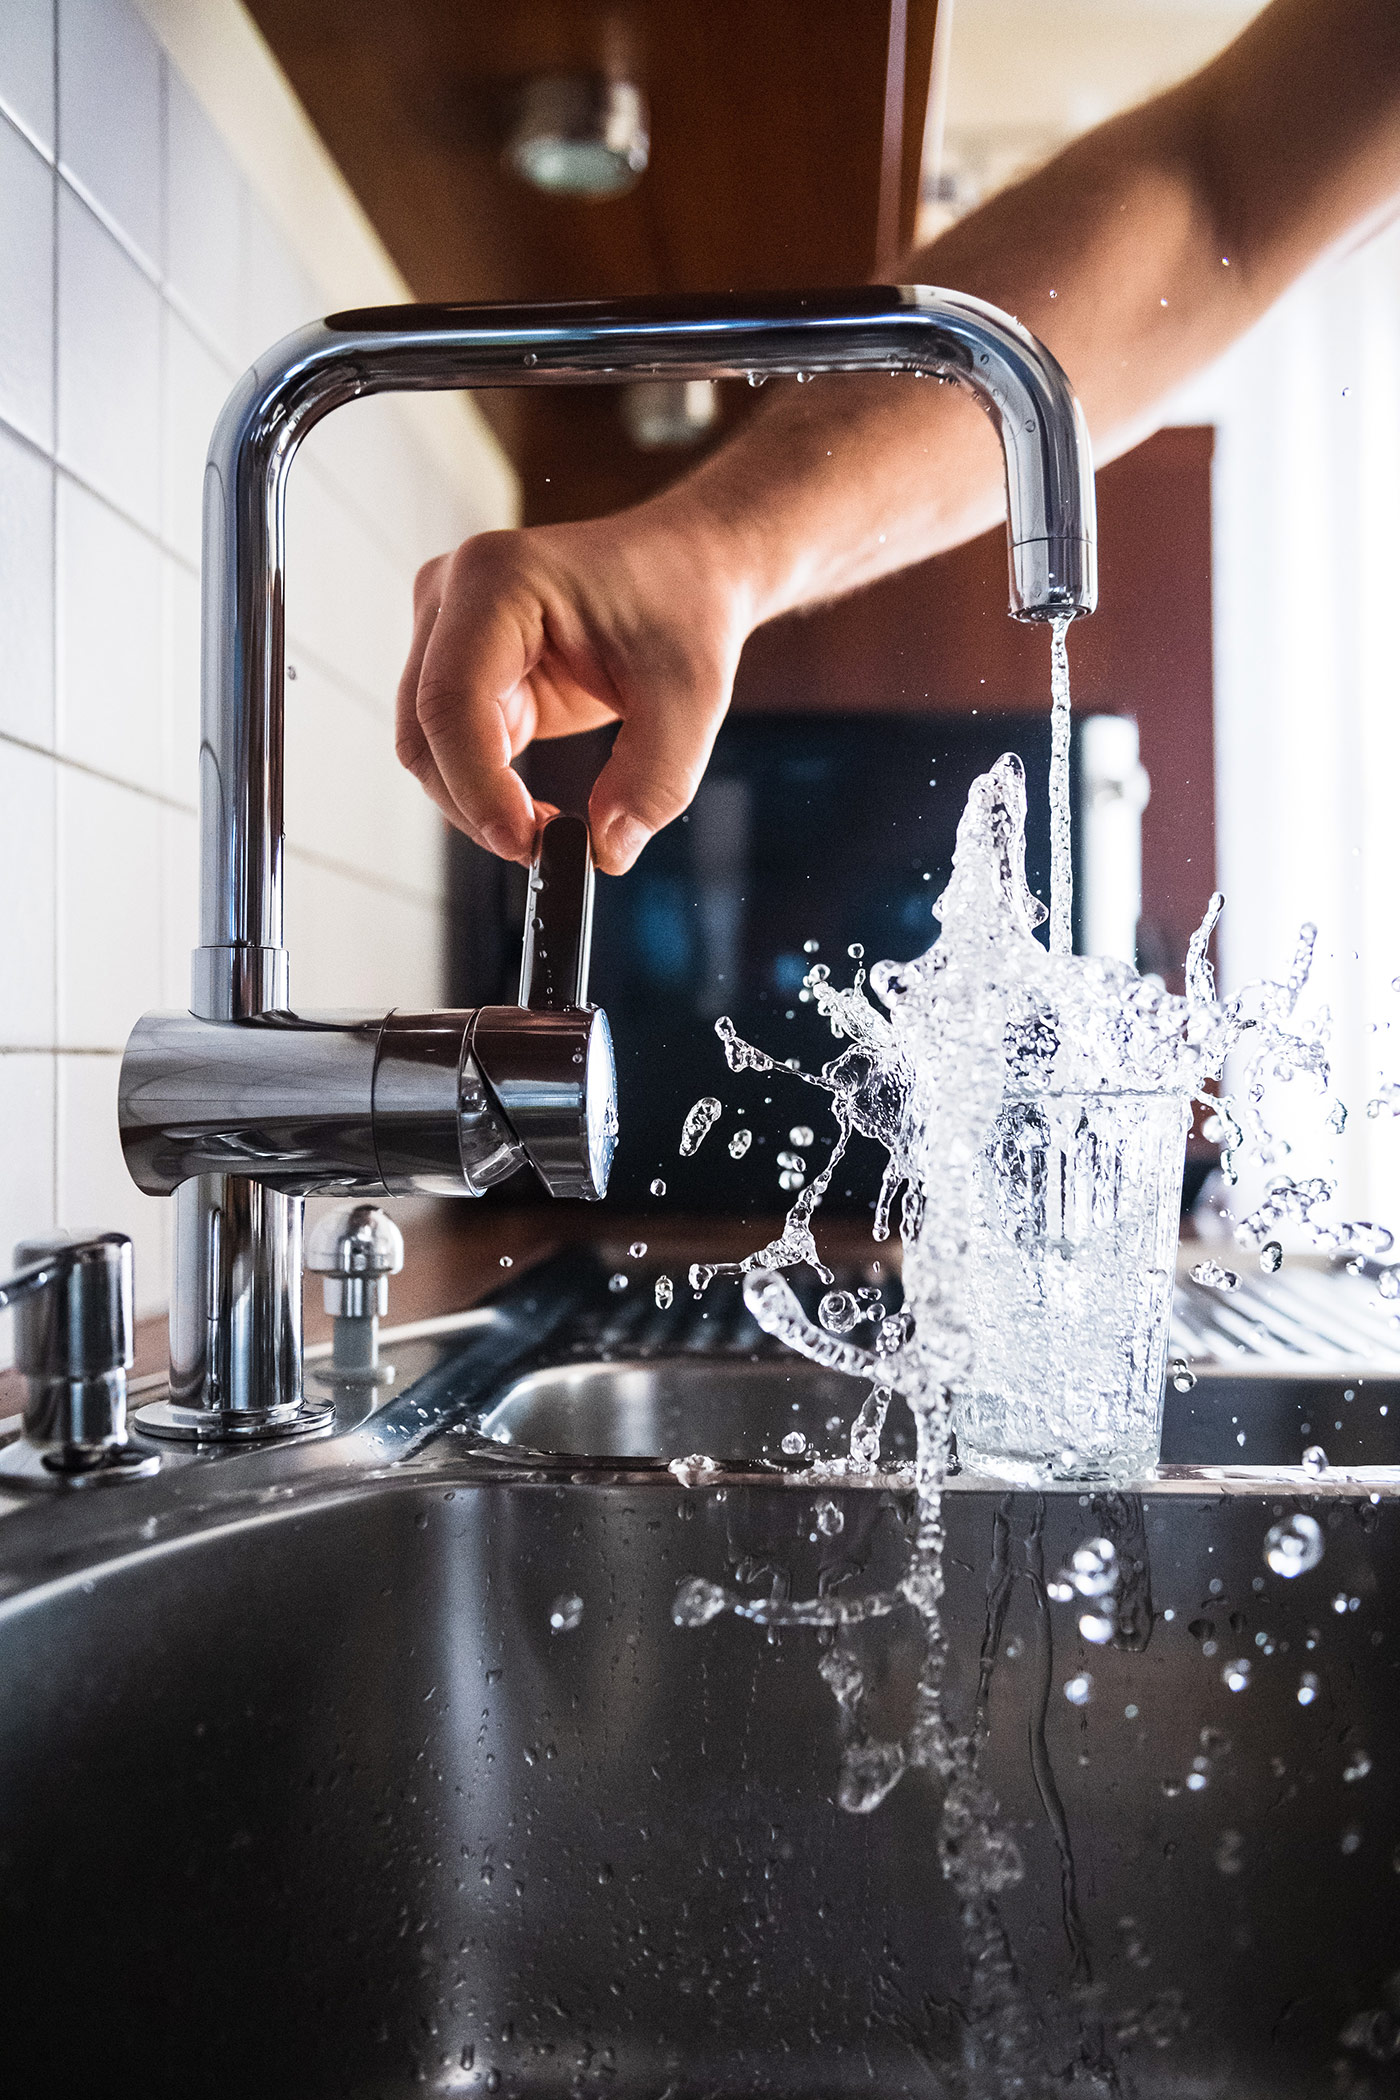 reduce water waste for your business